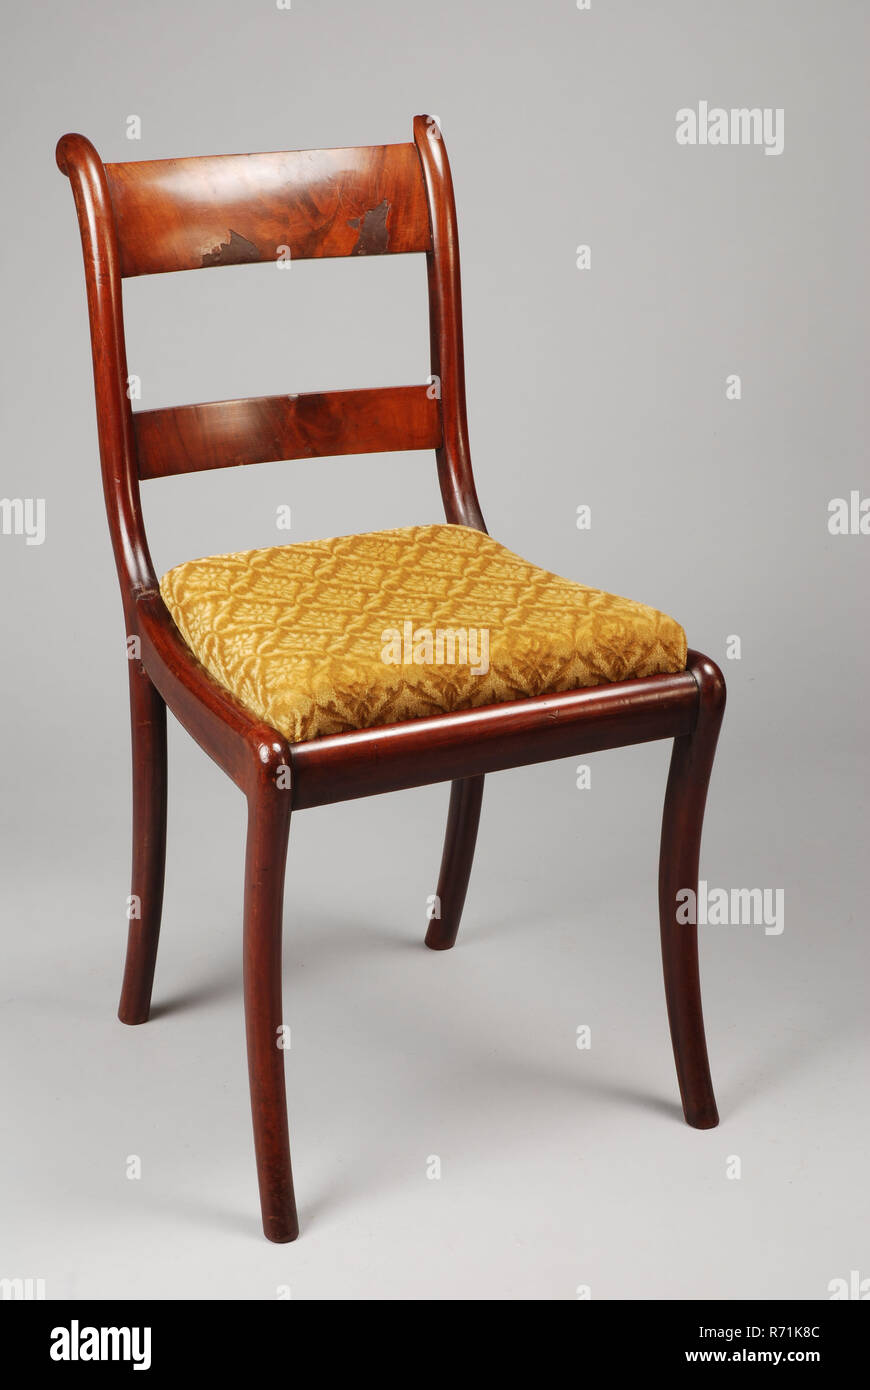 Mahogany Biedermeier chair, chair furniture furniture interior design wood  mahogany velvet, Two mahogany Biedermeier chairs model round legs broader  rows of wood is redder in color slightly different dimensions. Veneered  hood and